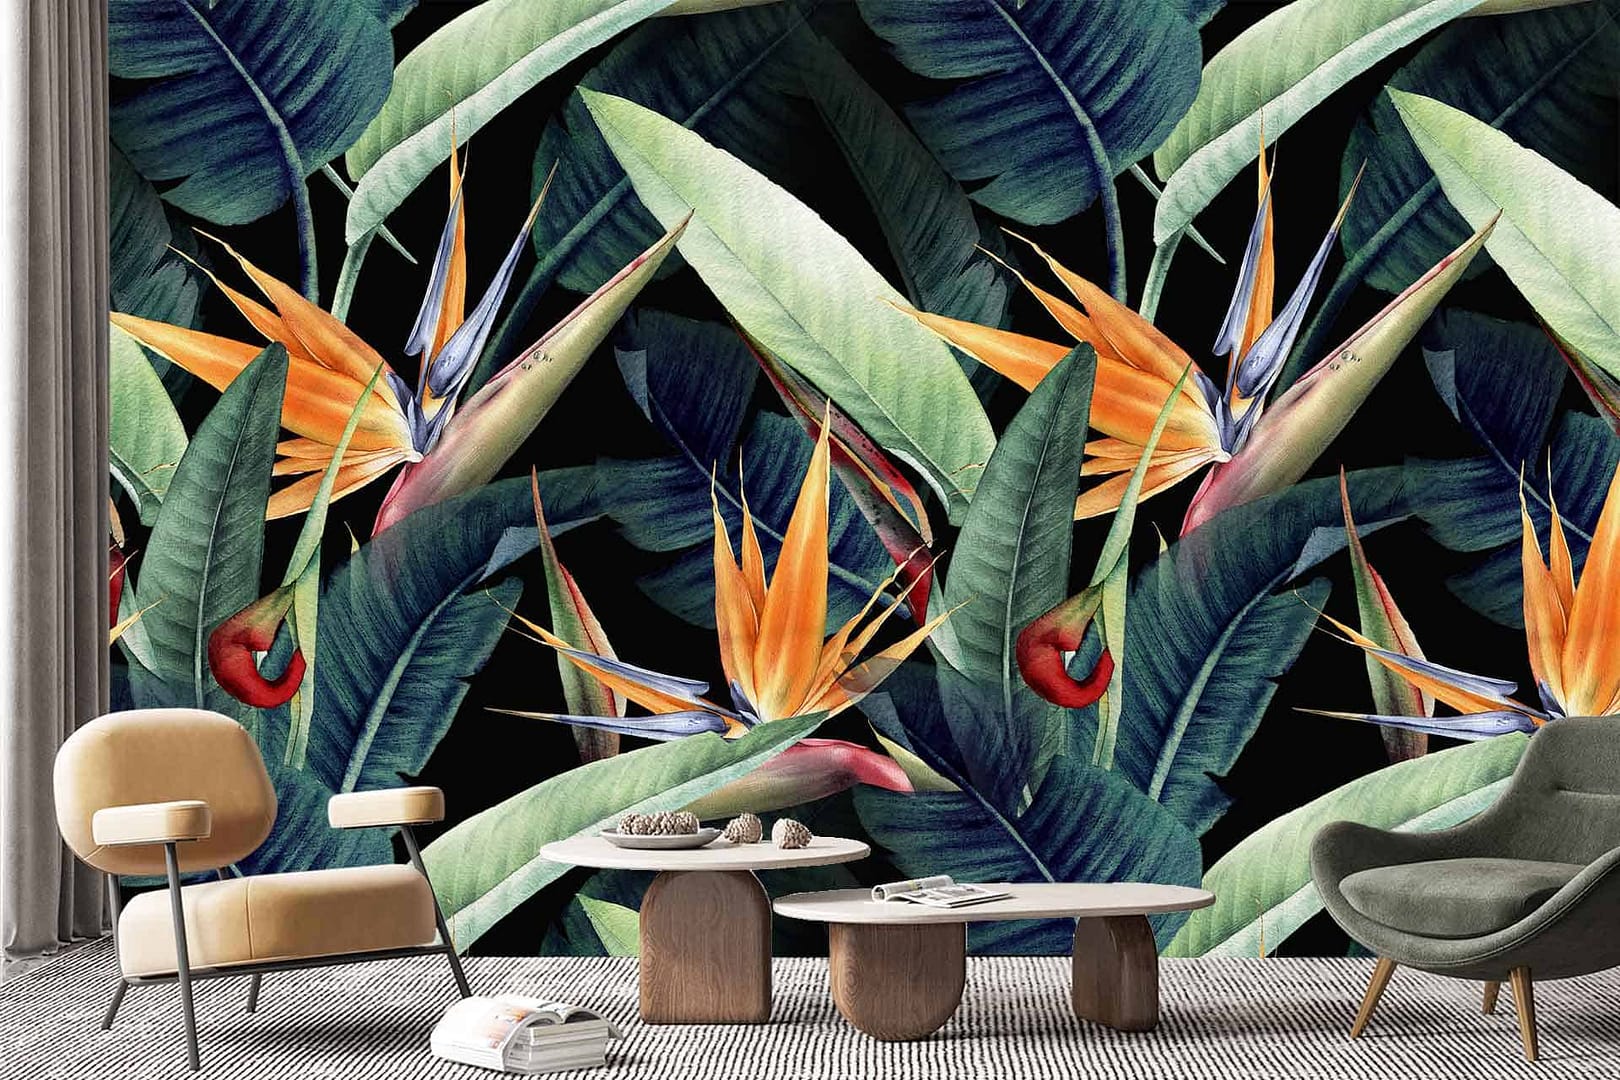 Birds of Paradise - a wallpaper made up of birds of paradise flowers and leaves in vibrant colours by Cara Saven Wall Design